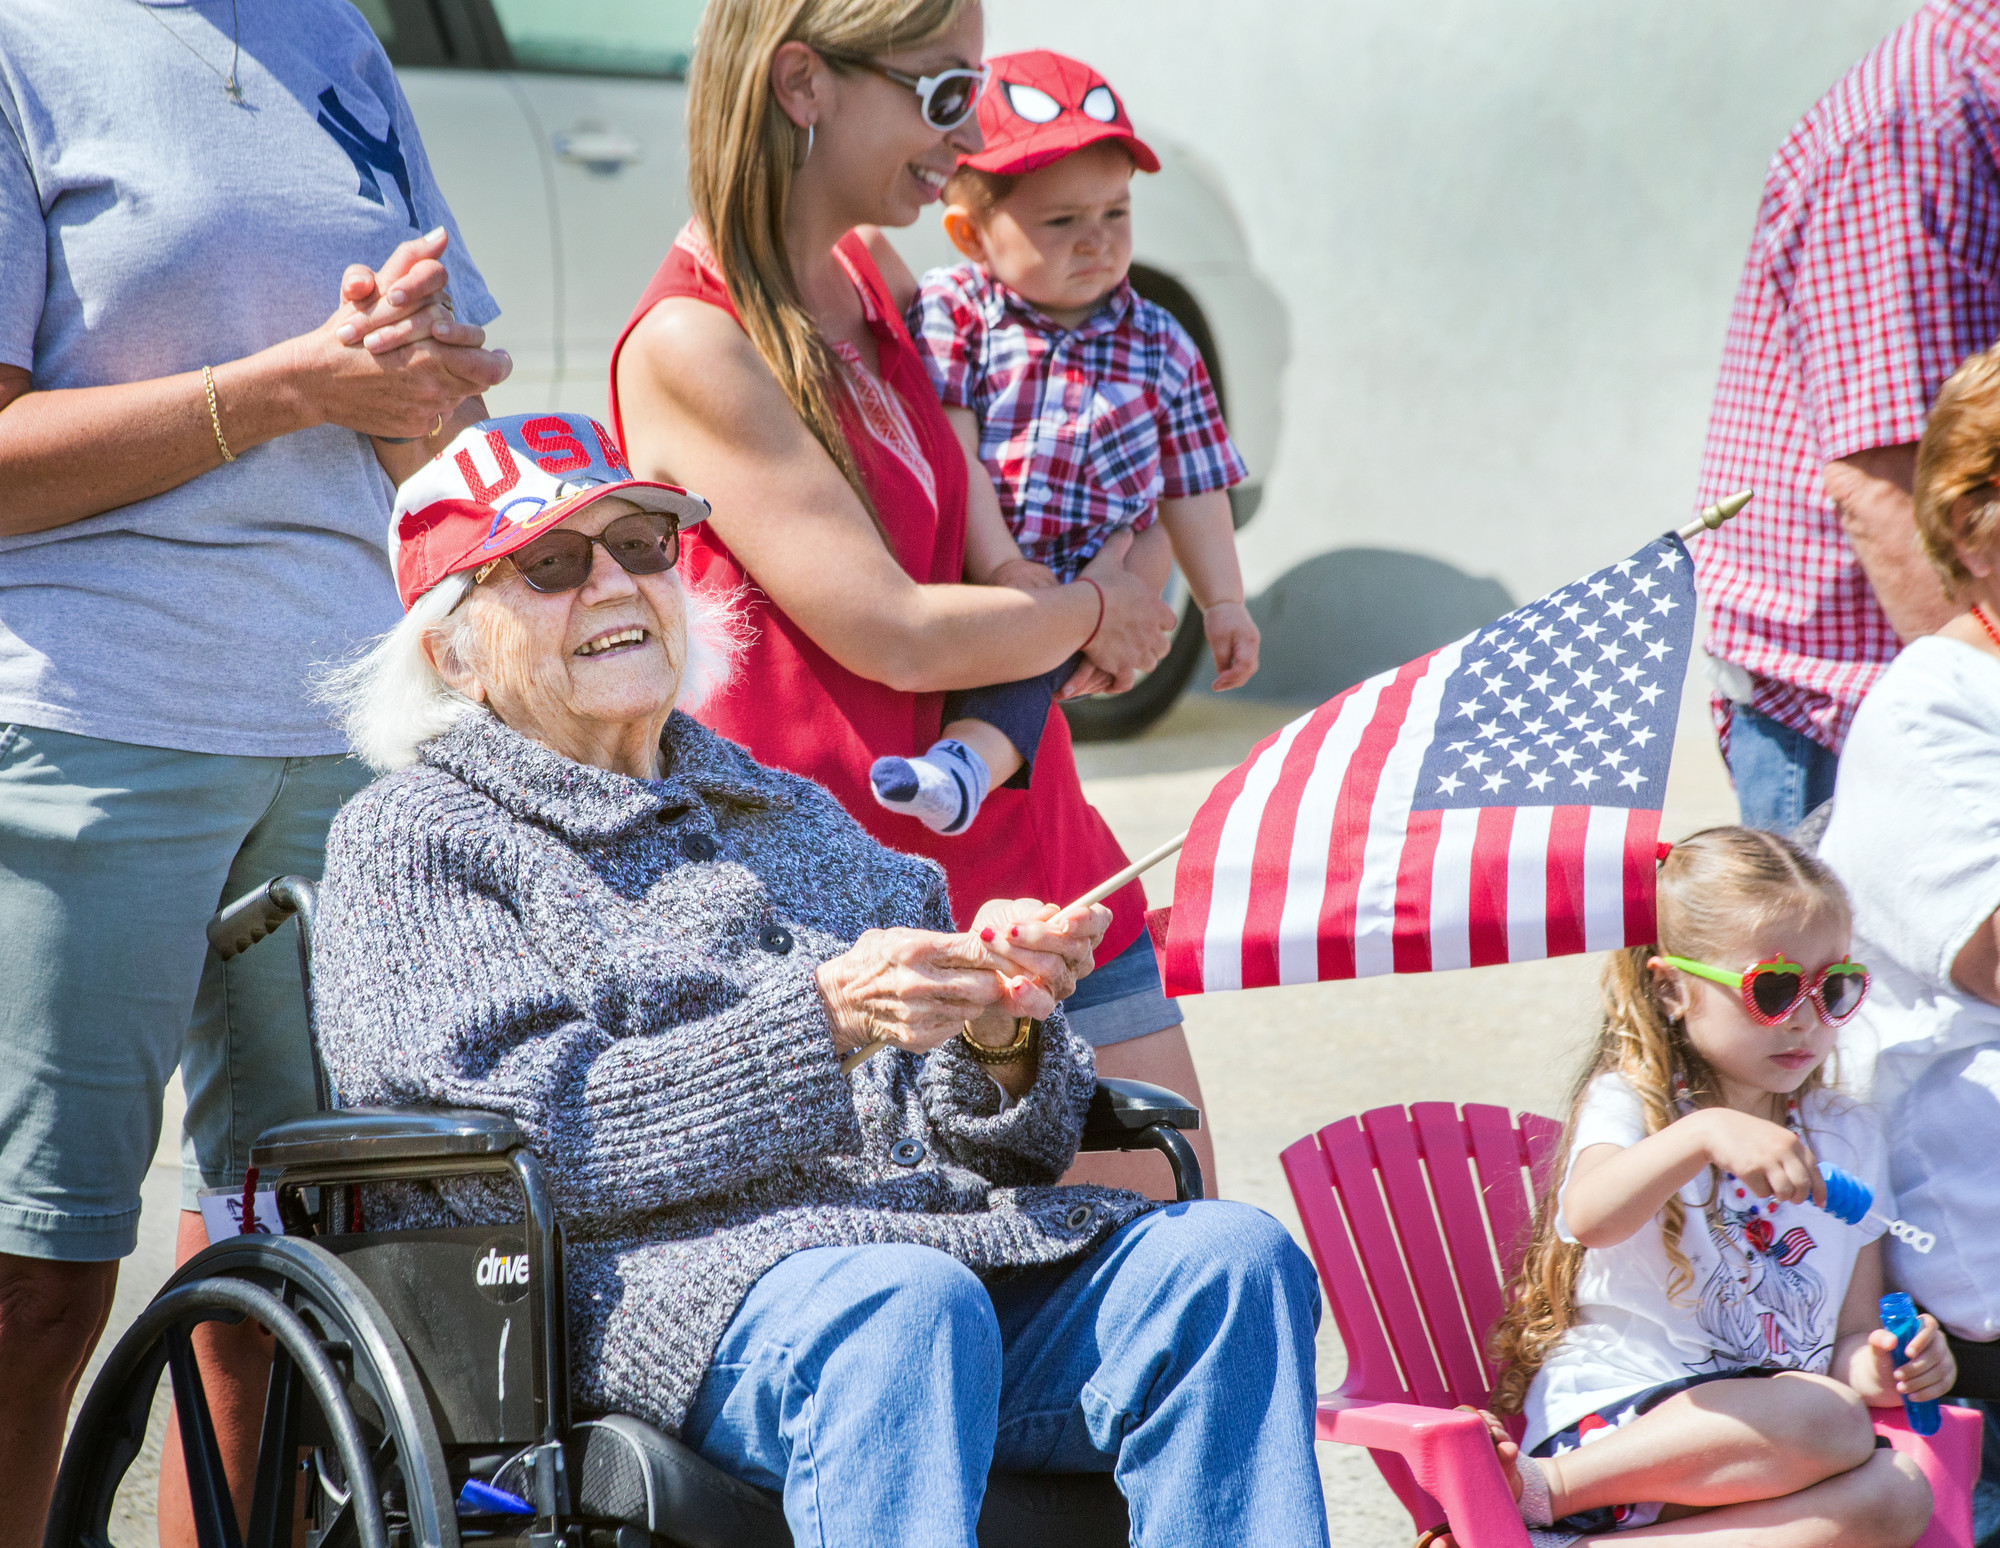 Zina Kleb, a former “Rosie the Riveter,” turned out for the parade. She worked to build The Republic P-47 Thunderbolt aircraft at Republic Aviation Corporation, an American aircraft manufacturer based in Farmingdale.